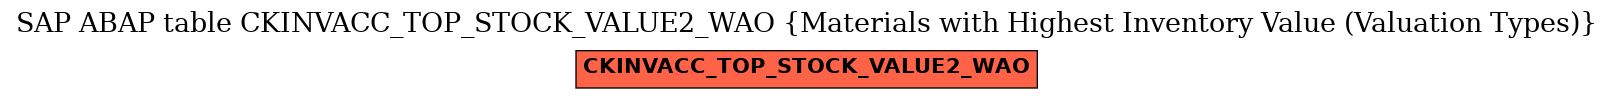 E-R Diagram for table CKINVACC_TOP_STOCK_VALUE2_WAO (Materials with Highest Inventory Value (Valuation Types))